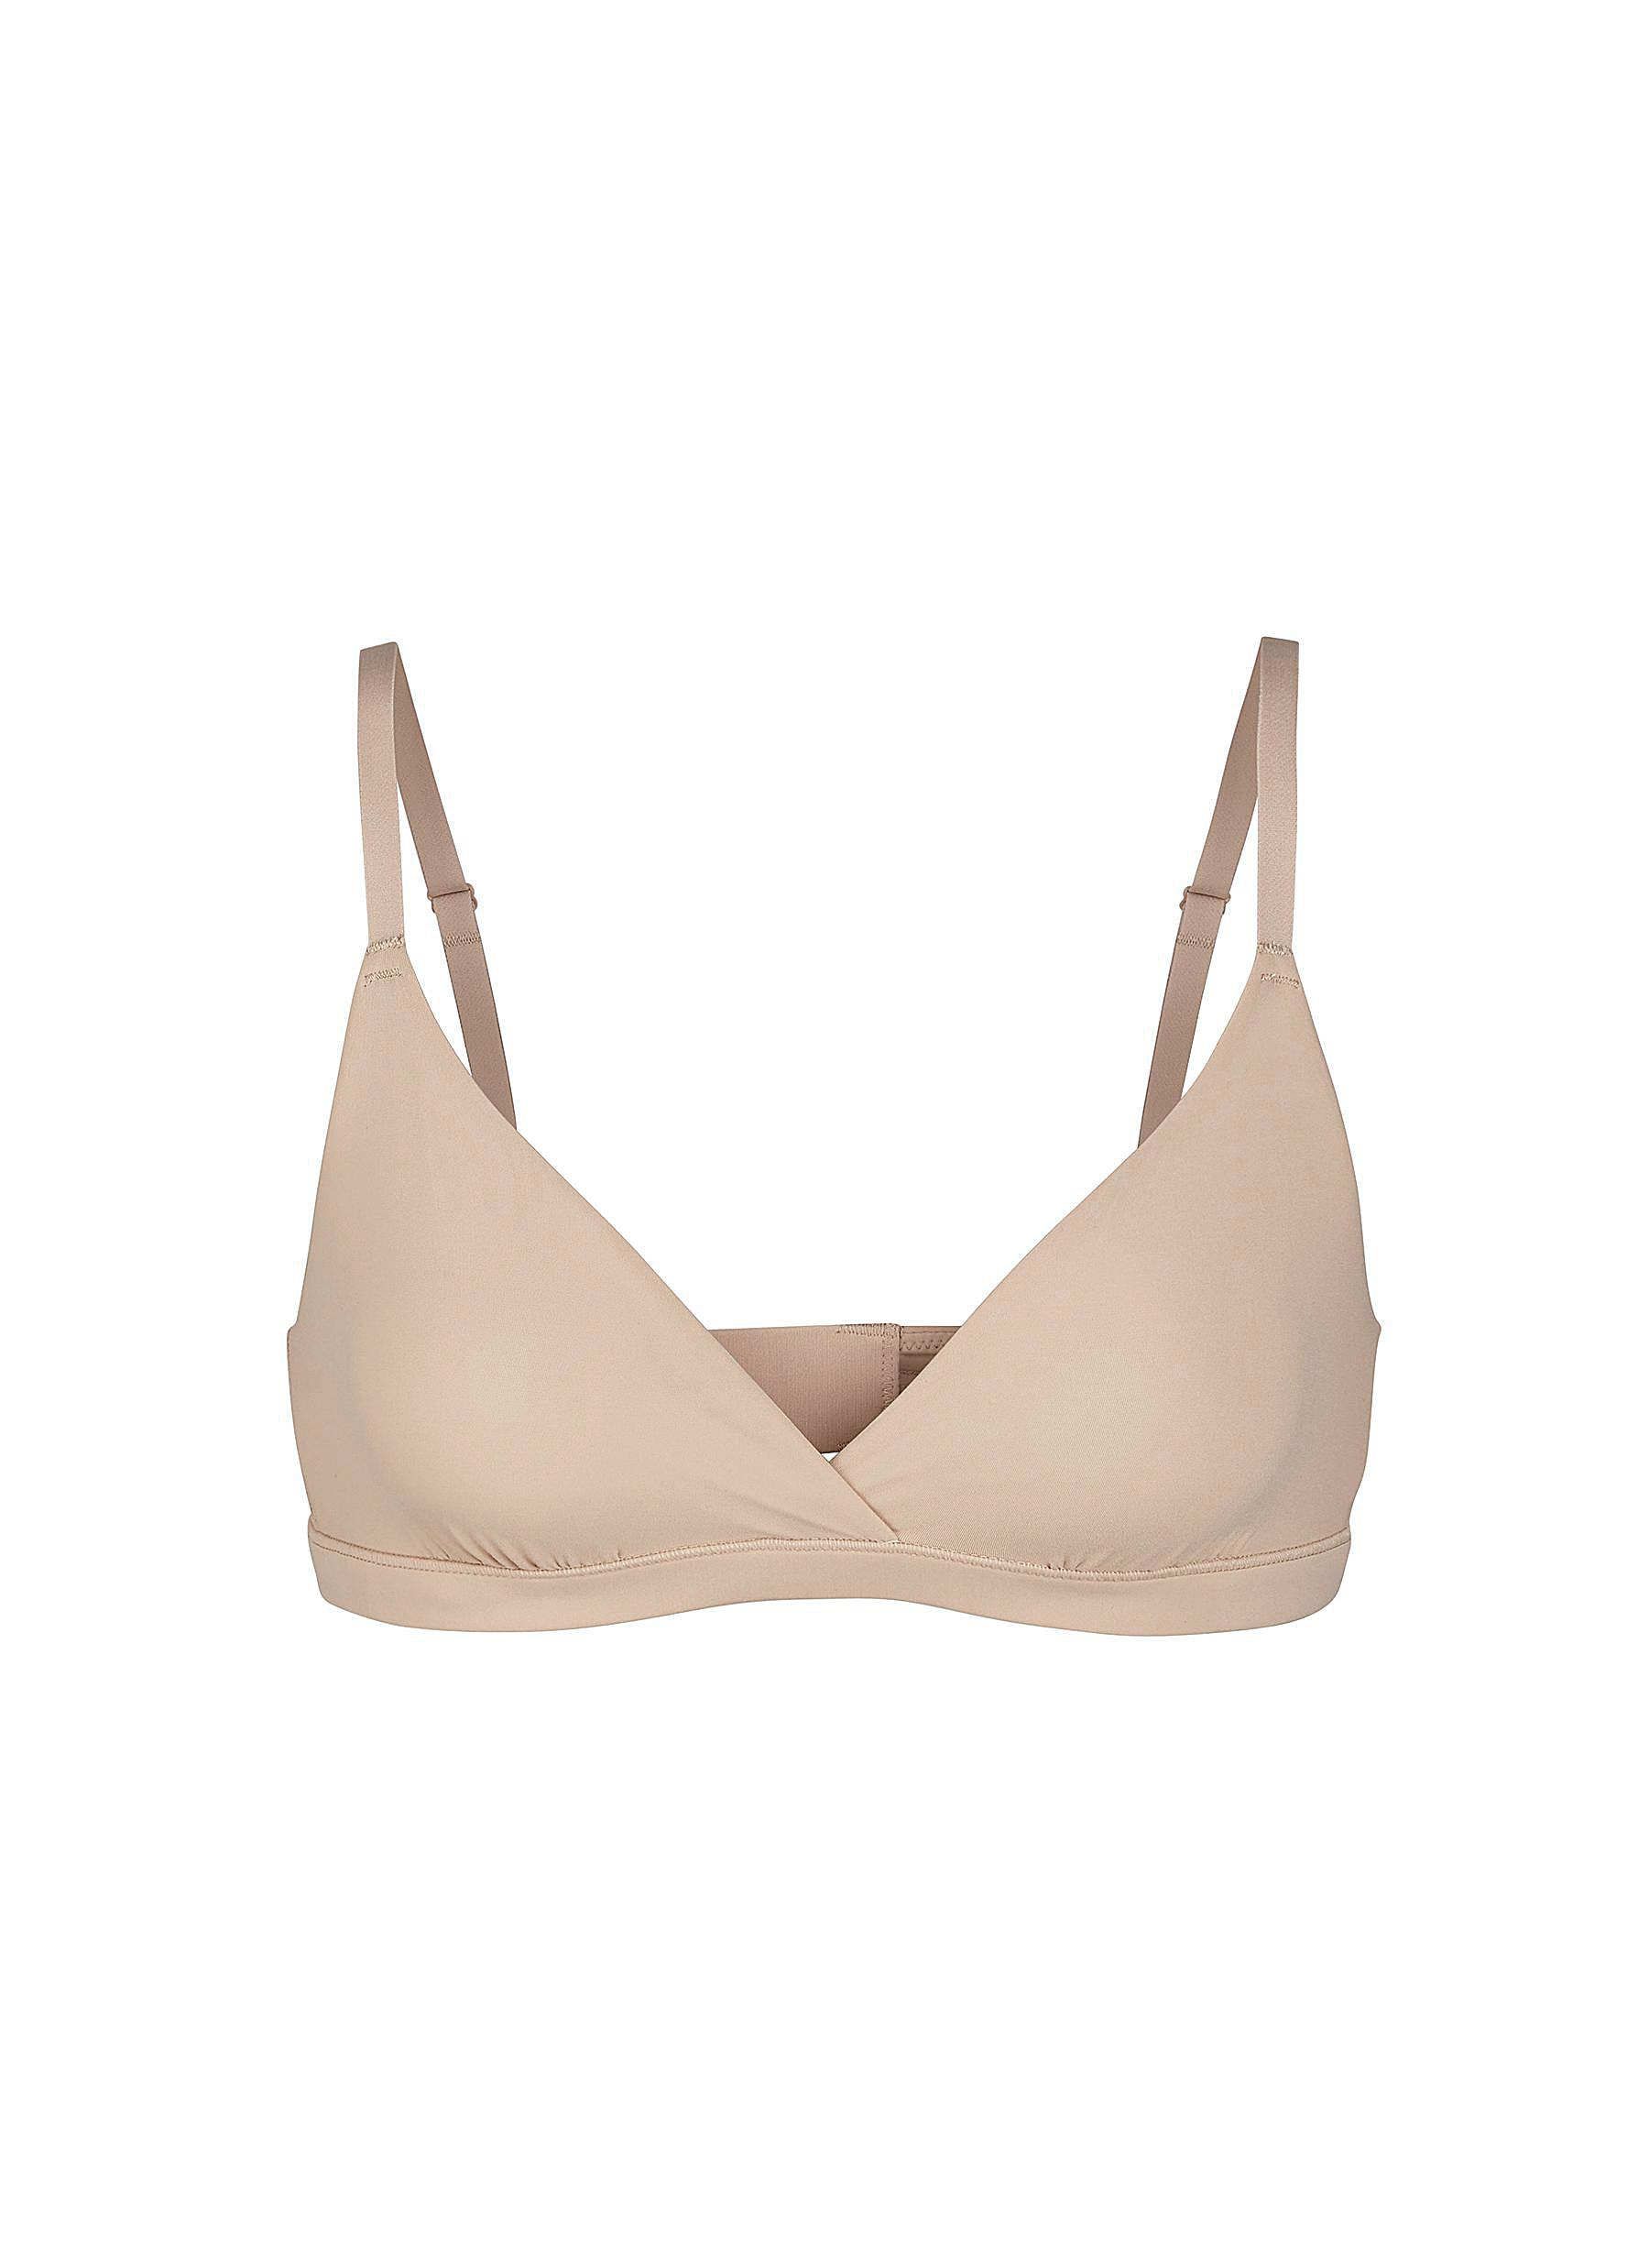 Track Fits Everybody Crossover Bralette - Silver - XS at Skims